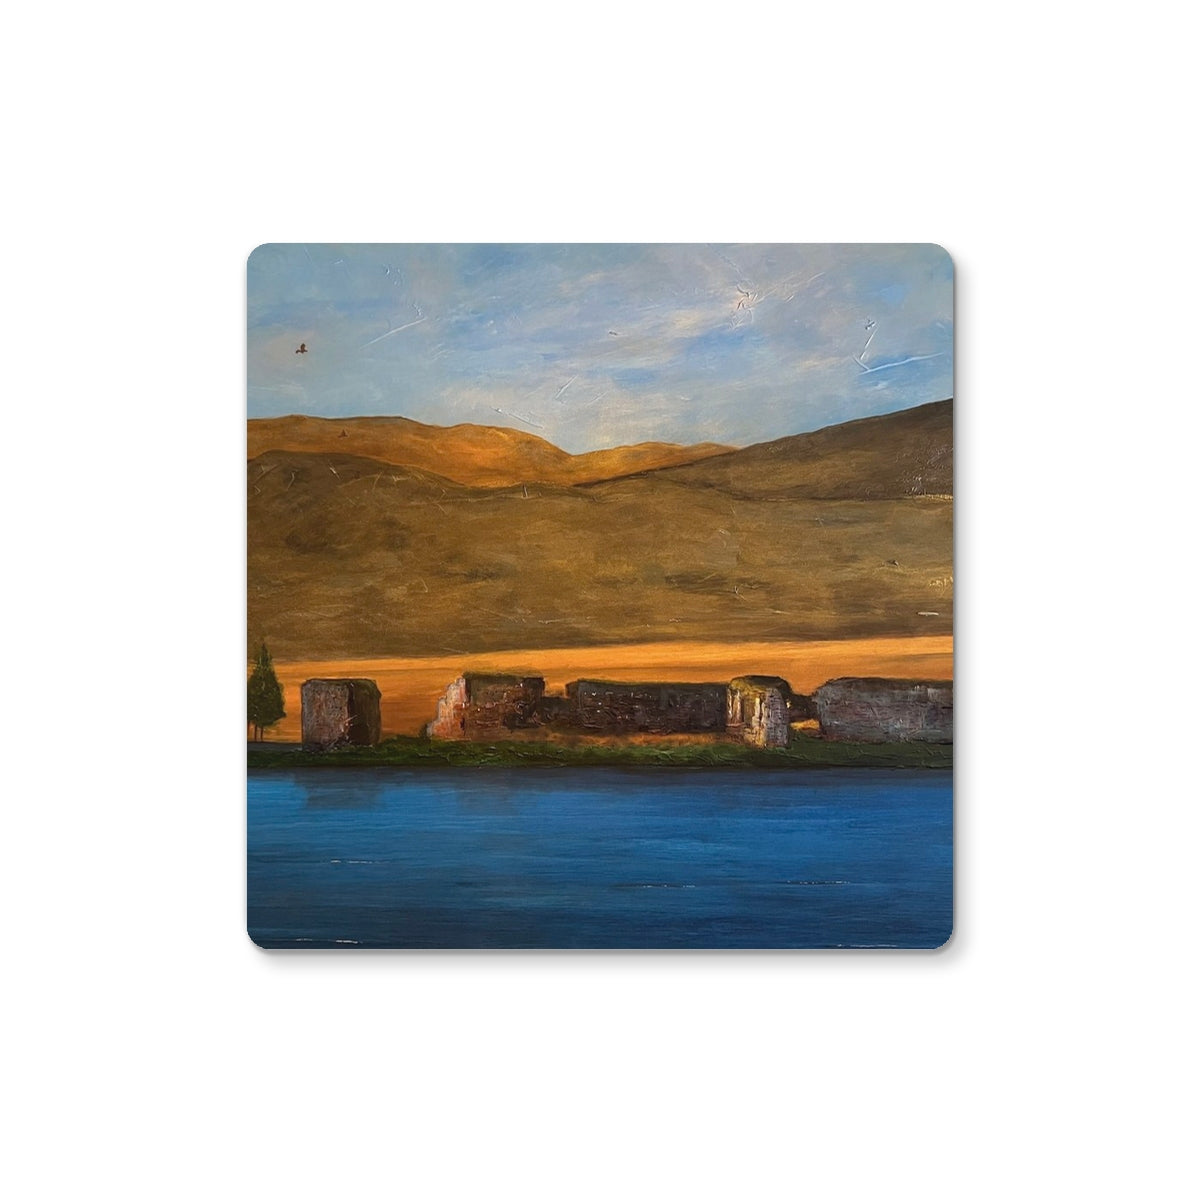 Lochindorb Castle Art Gifts Coaster-Coasters-Scottish Lochs & Mountains Art Gallery-Single Coaster-Paintings, Prints, Homeware, Art Gifts From Scotland By Scottish Artist Kevin Hunter